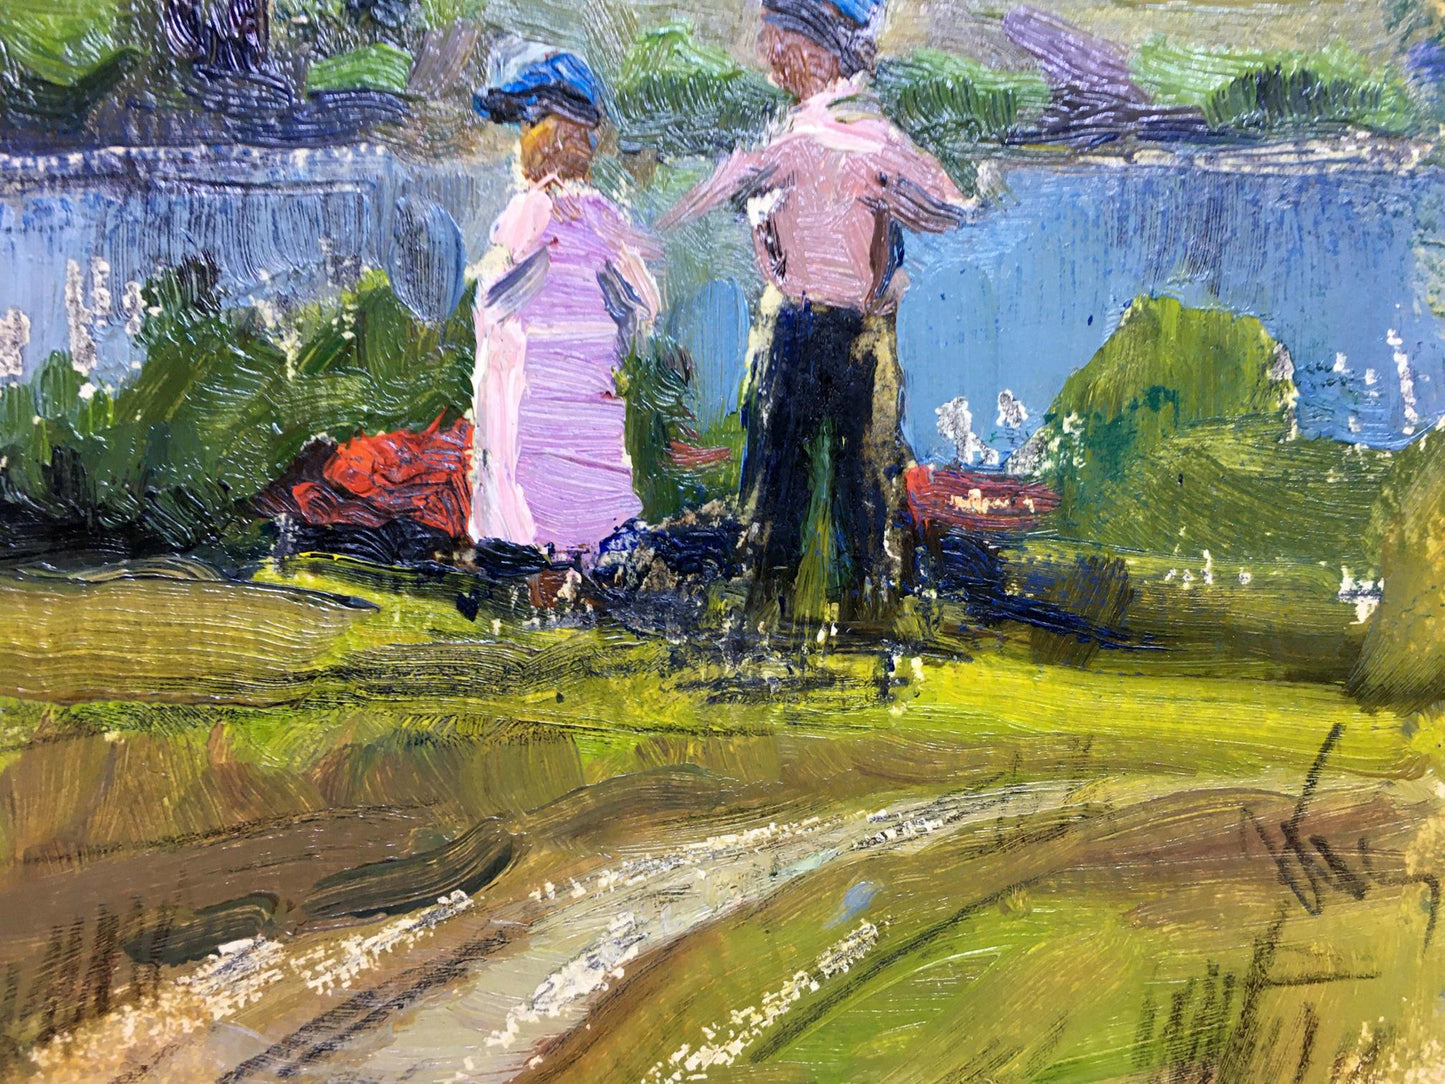 Oil painting Kids by the river Popov I. A.